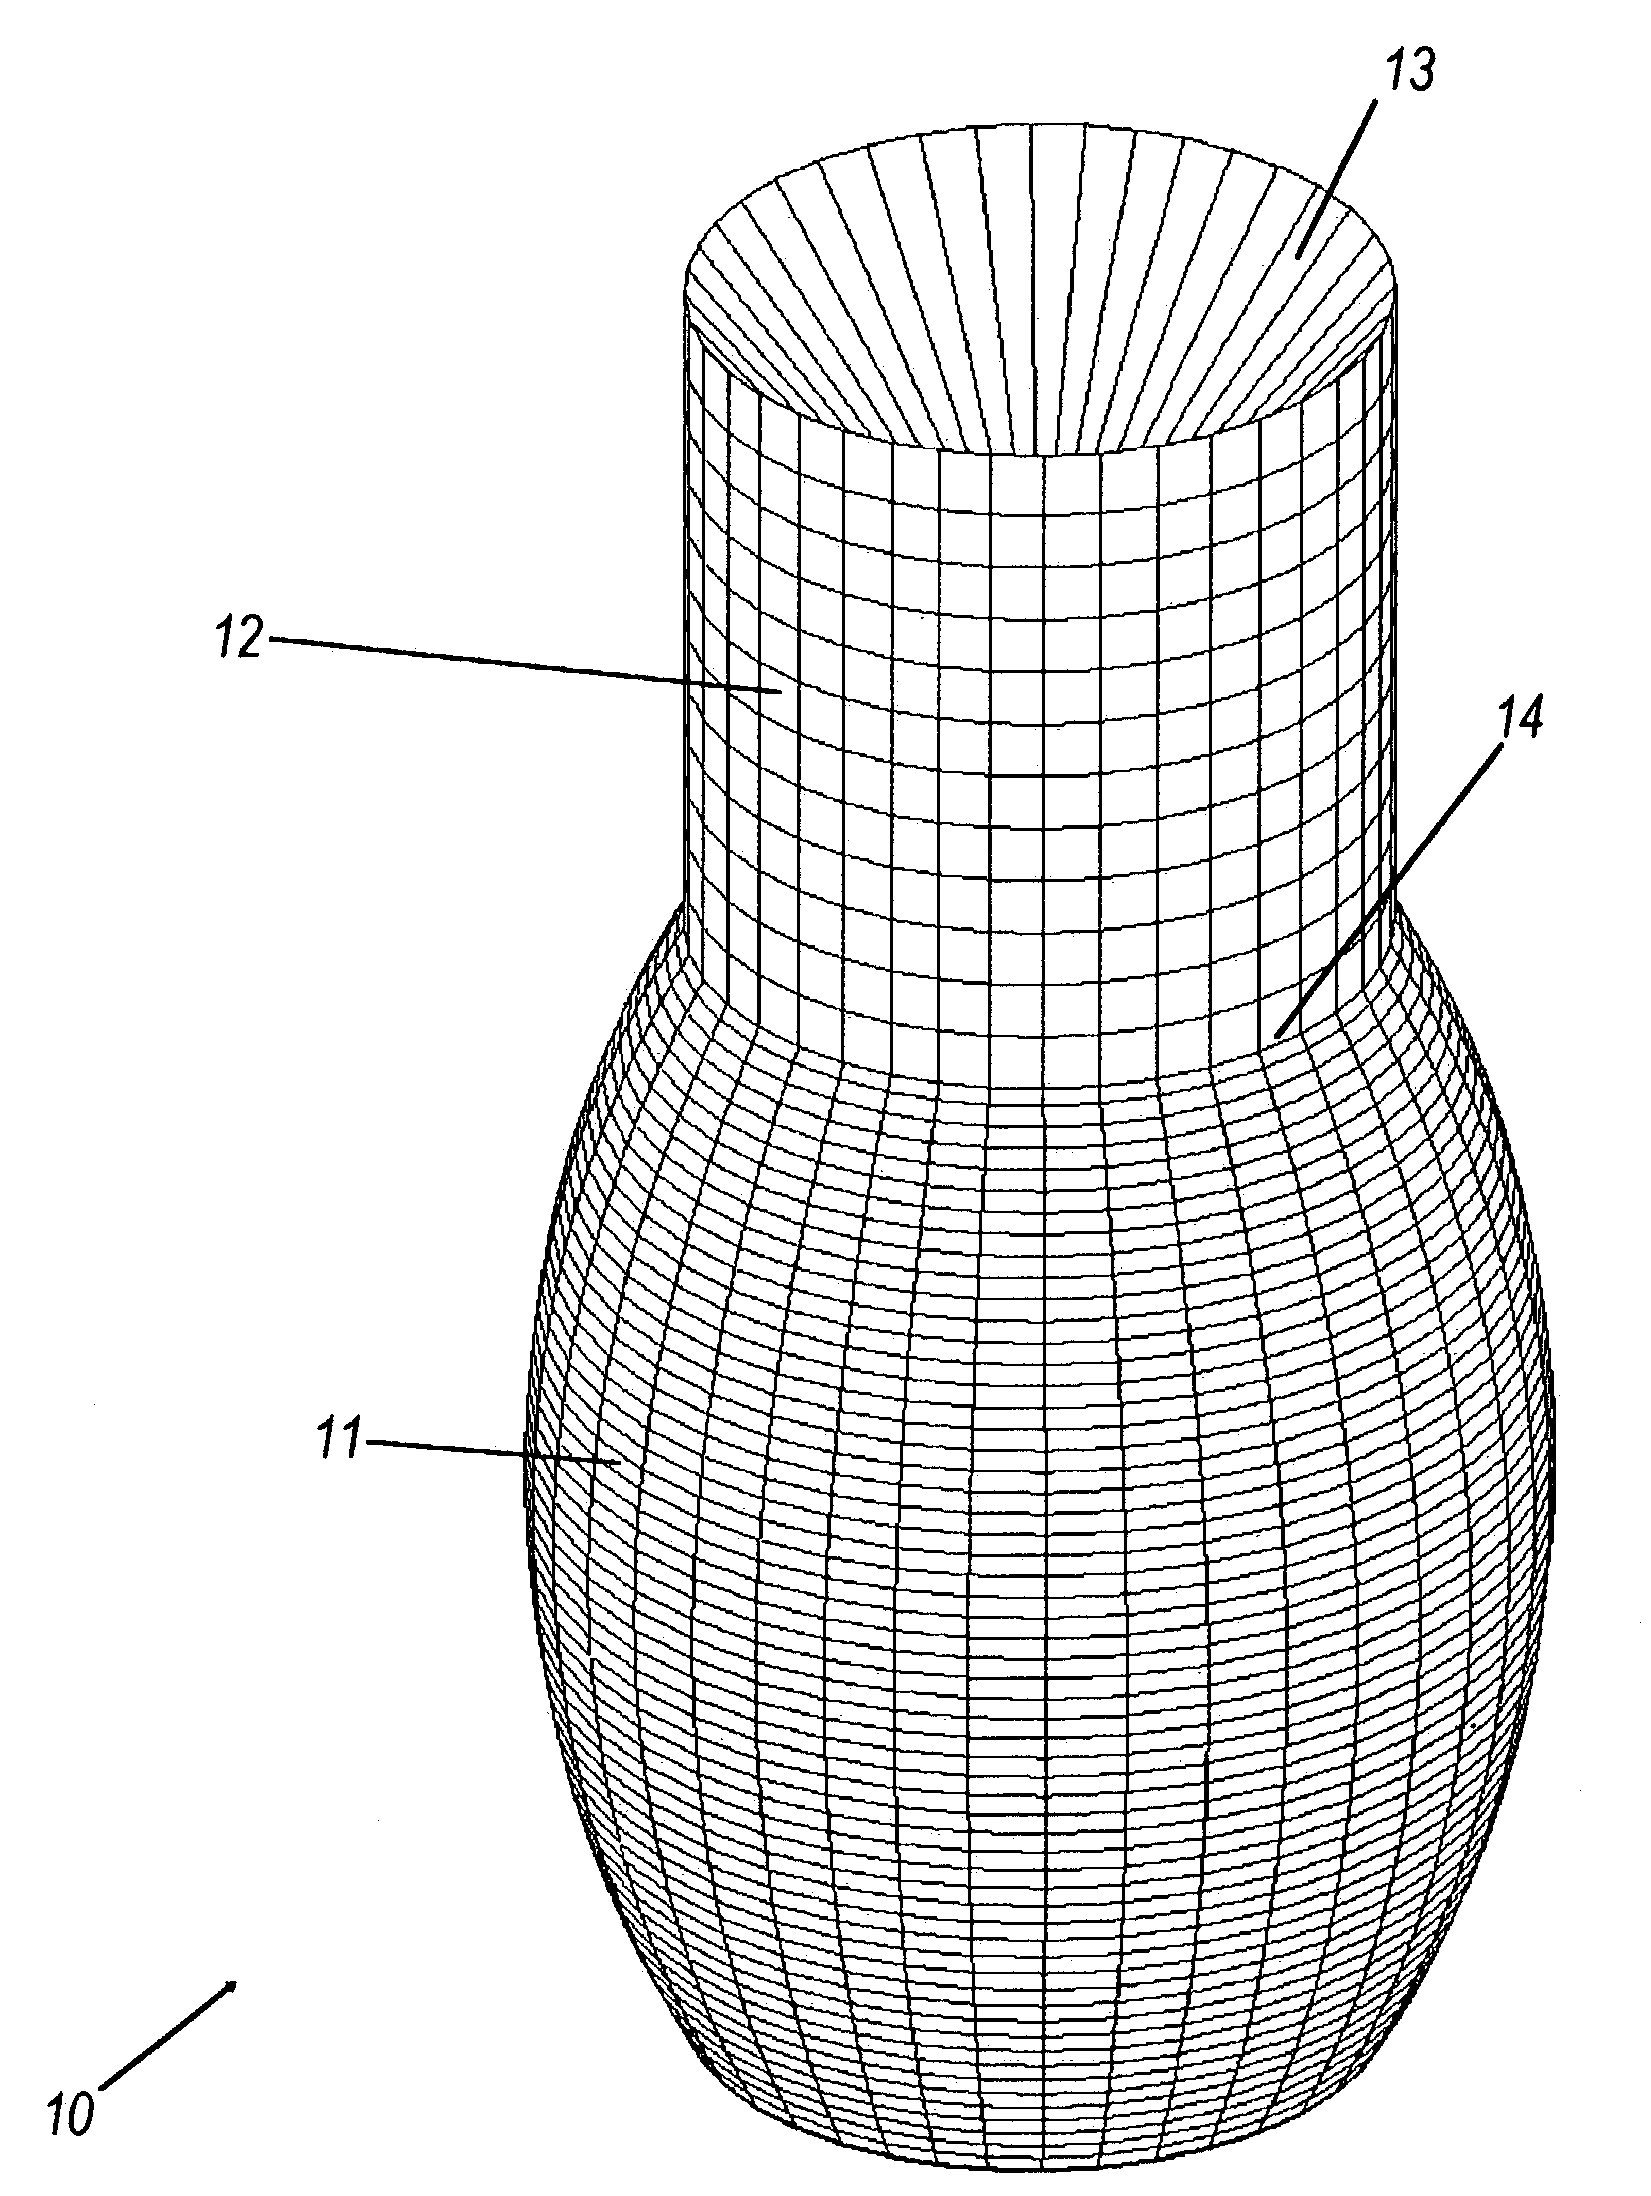 Optical device for repositioning and redistributing an LED's light